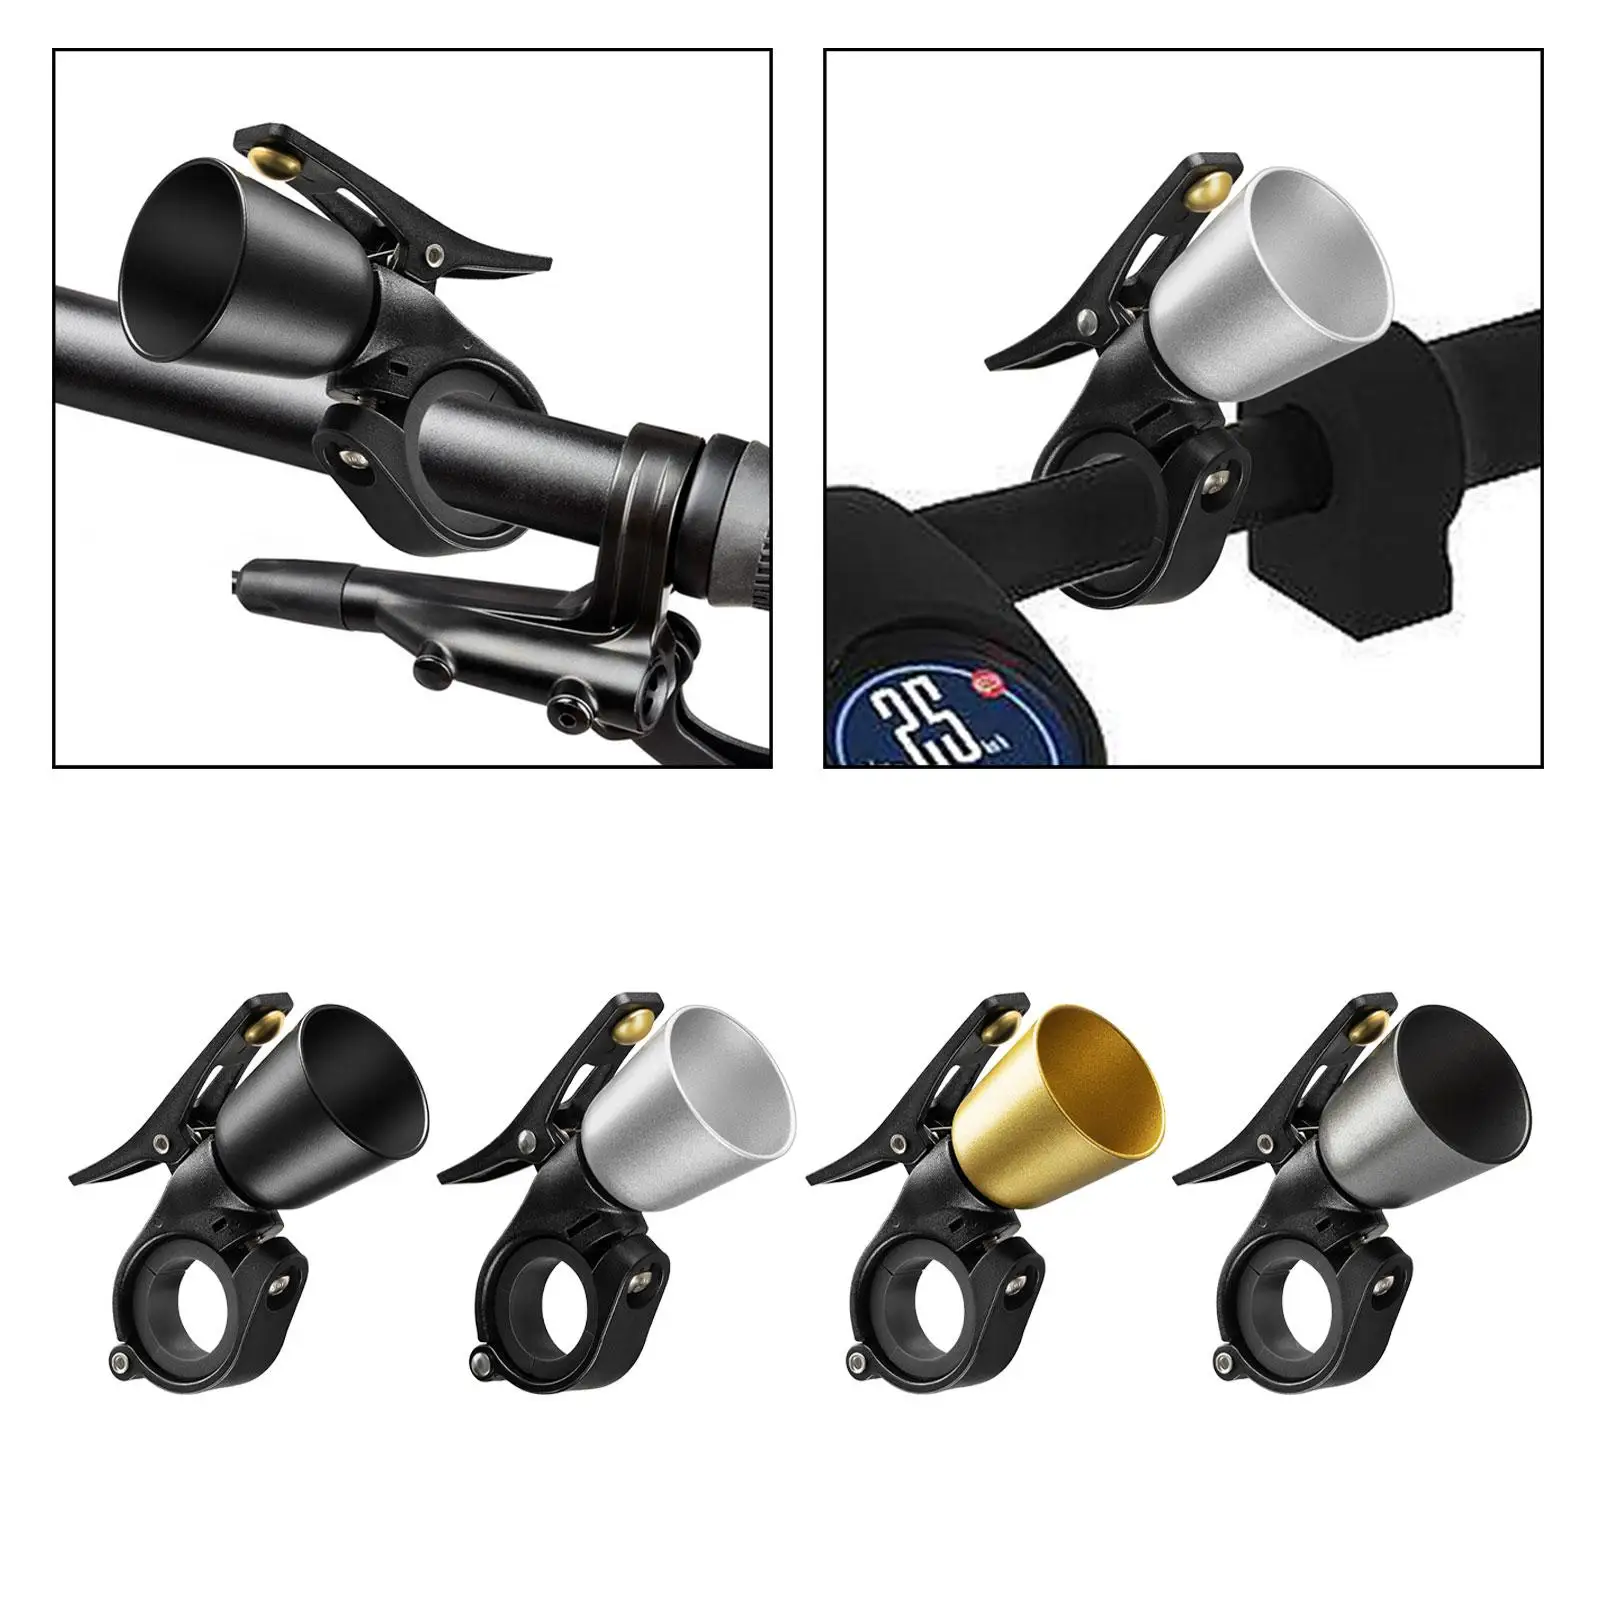 Bike Bell Stainless Steel for Kids Adults Loud Crisp Bicycle Bell Riding Outdoor Folding Bike Mountain Road Bike Equipment